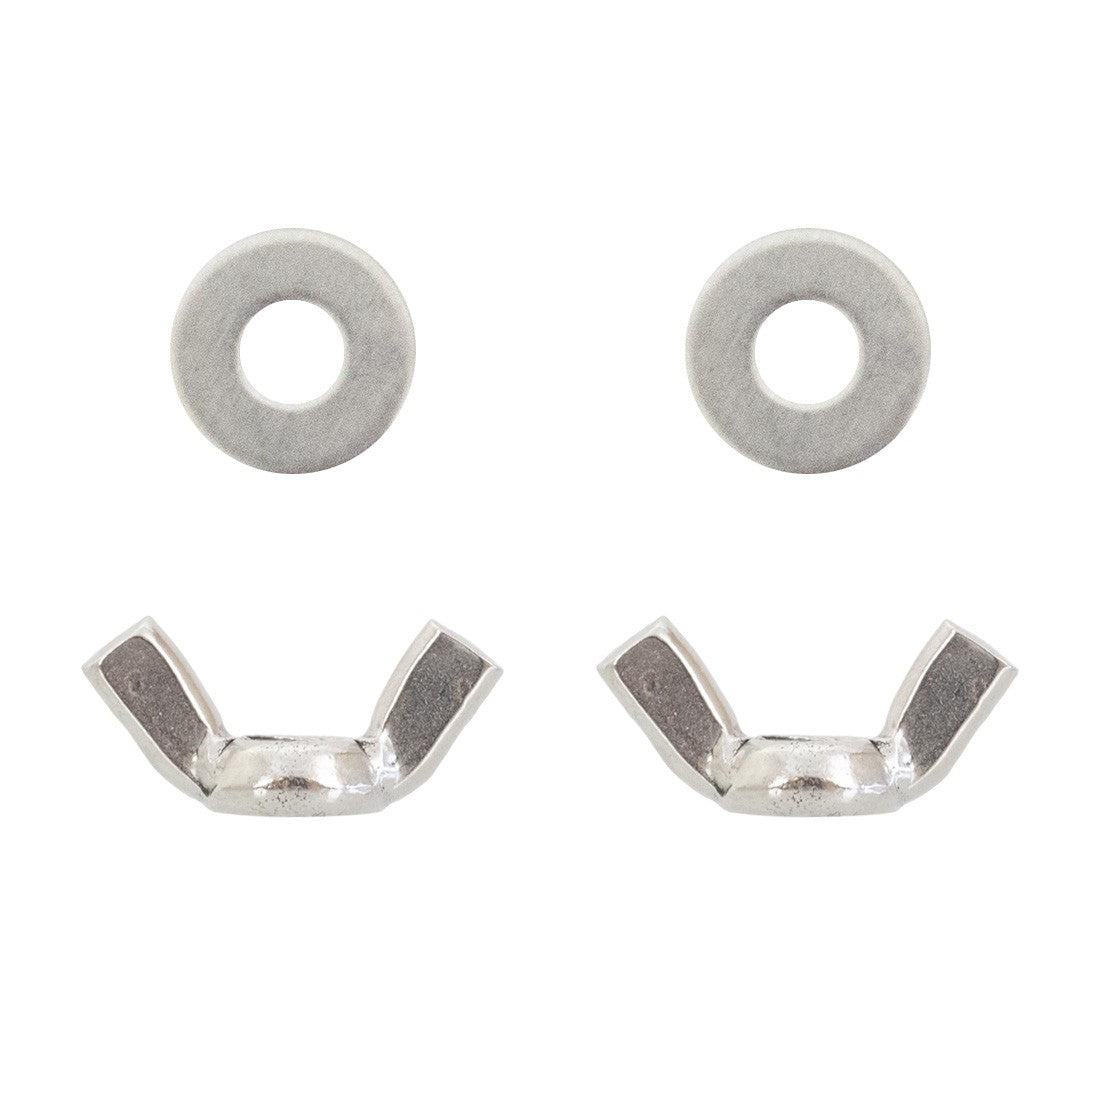 XERO Replacement Wing Nuts for Bronze Wool Pad Holder –